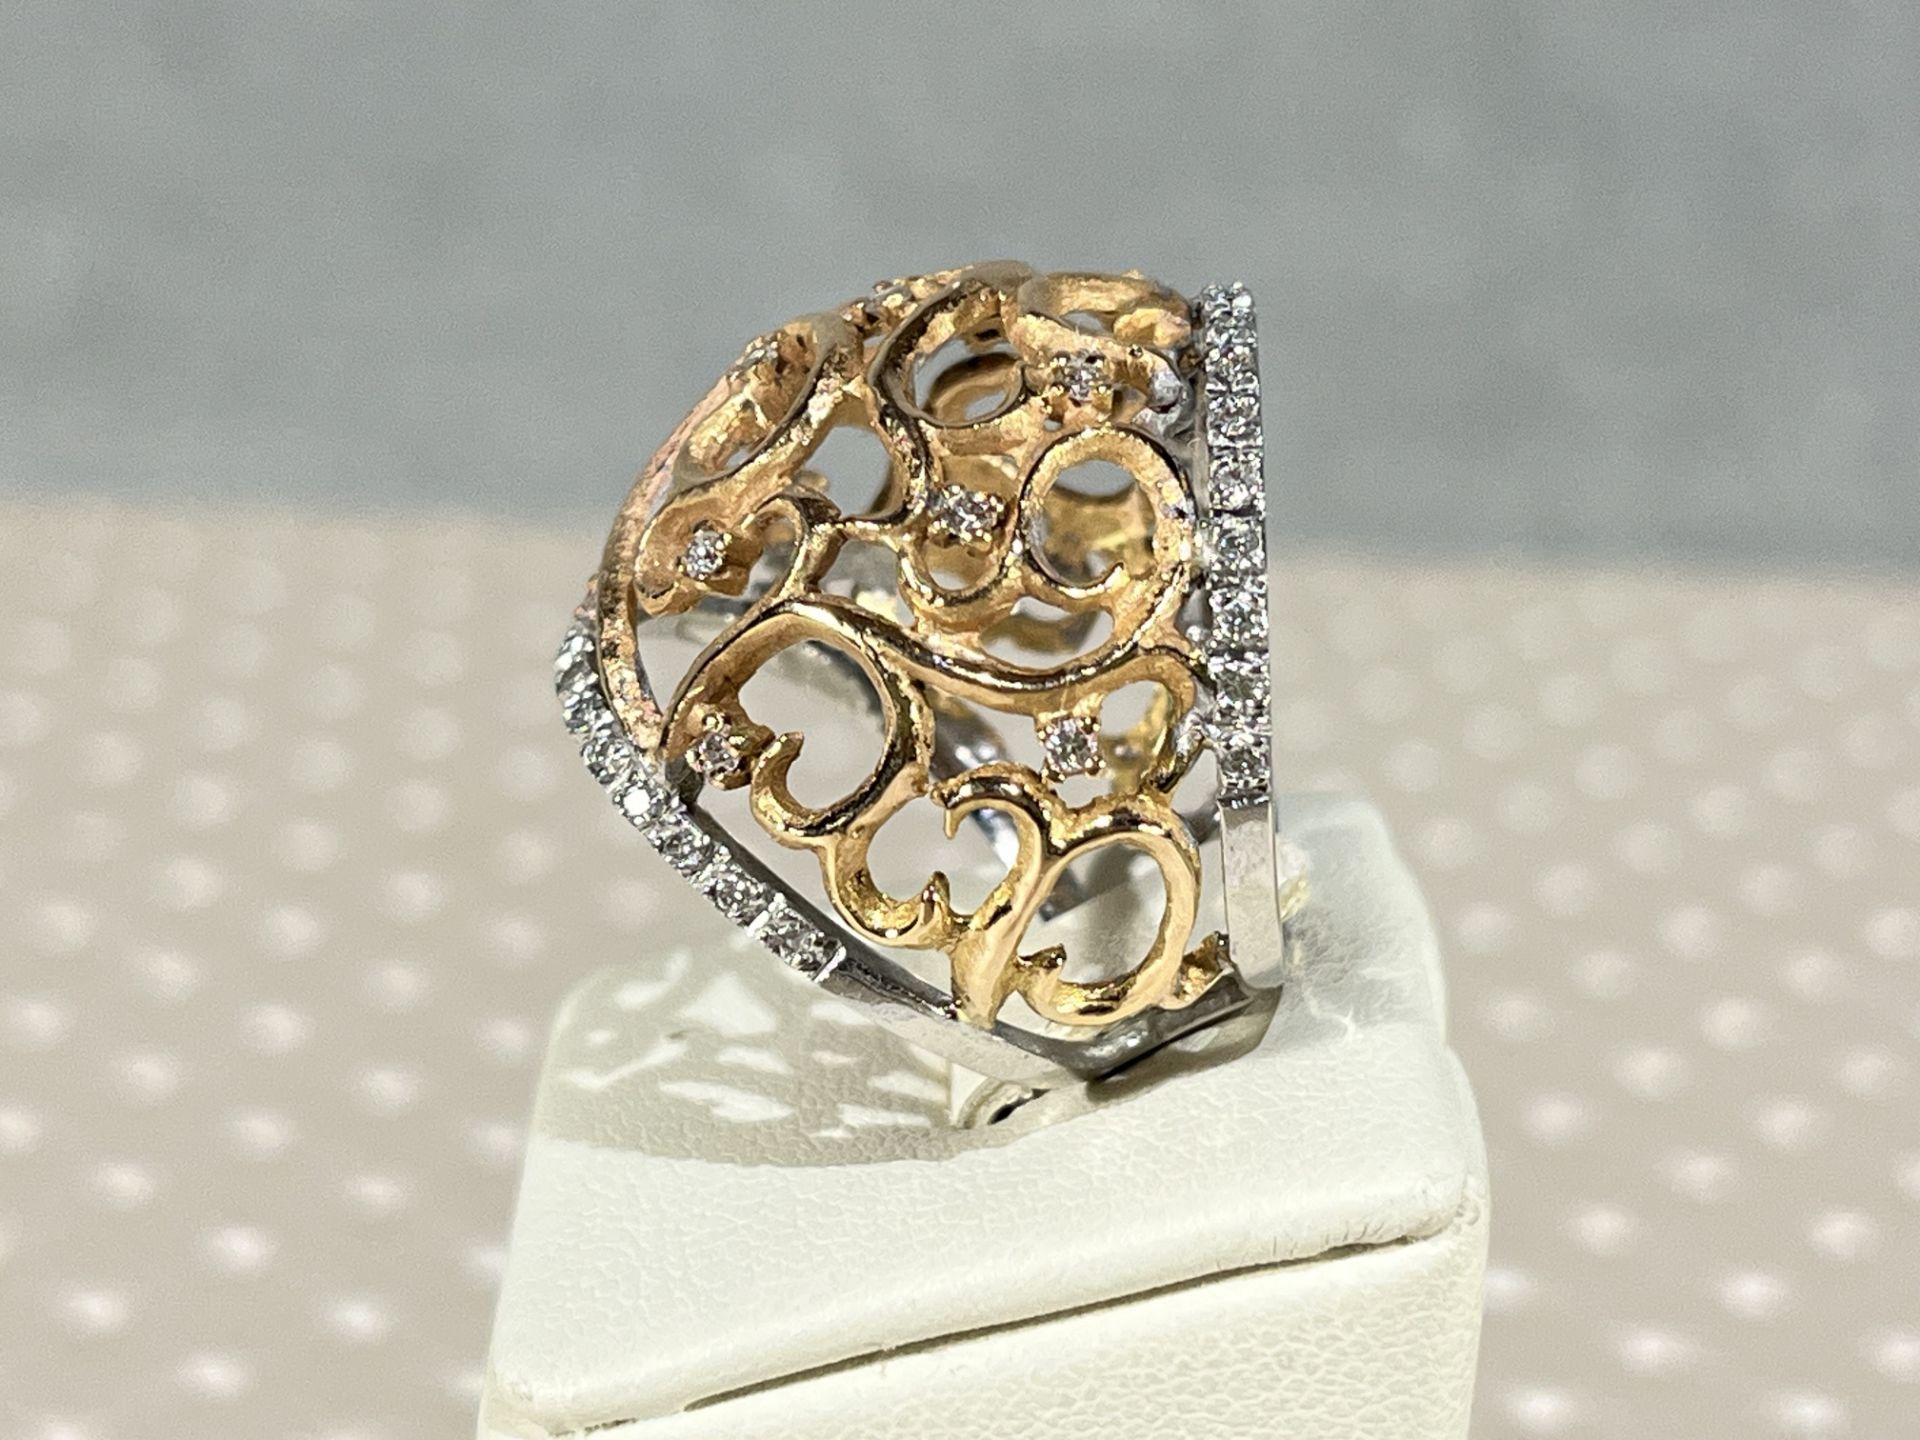 18k white and rose GOLD ring - Brilliant cut diamonds 0.60 ct - Weight: 11.7 gr - Image 3 of 4